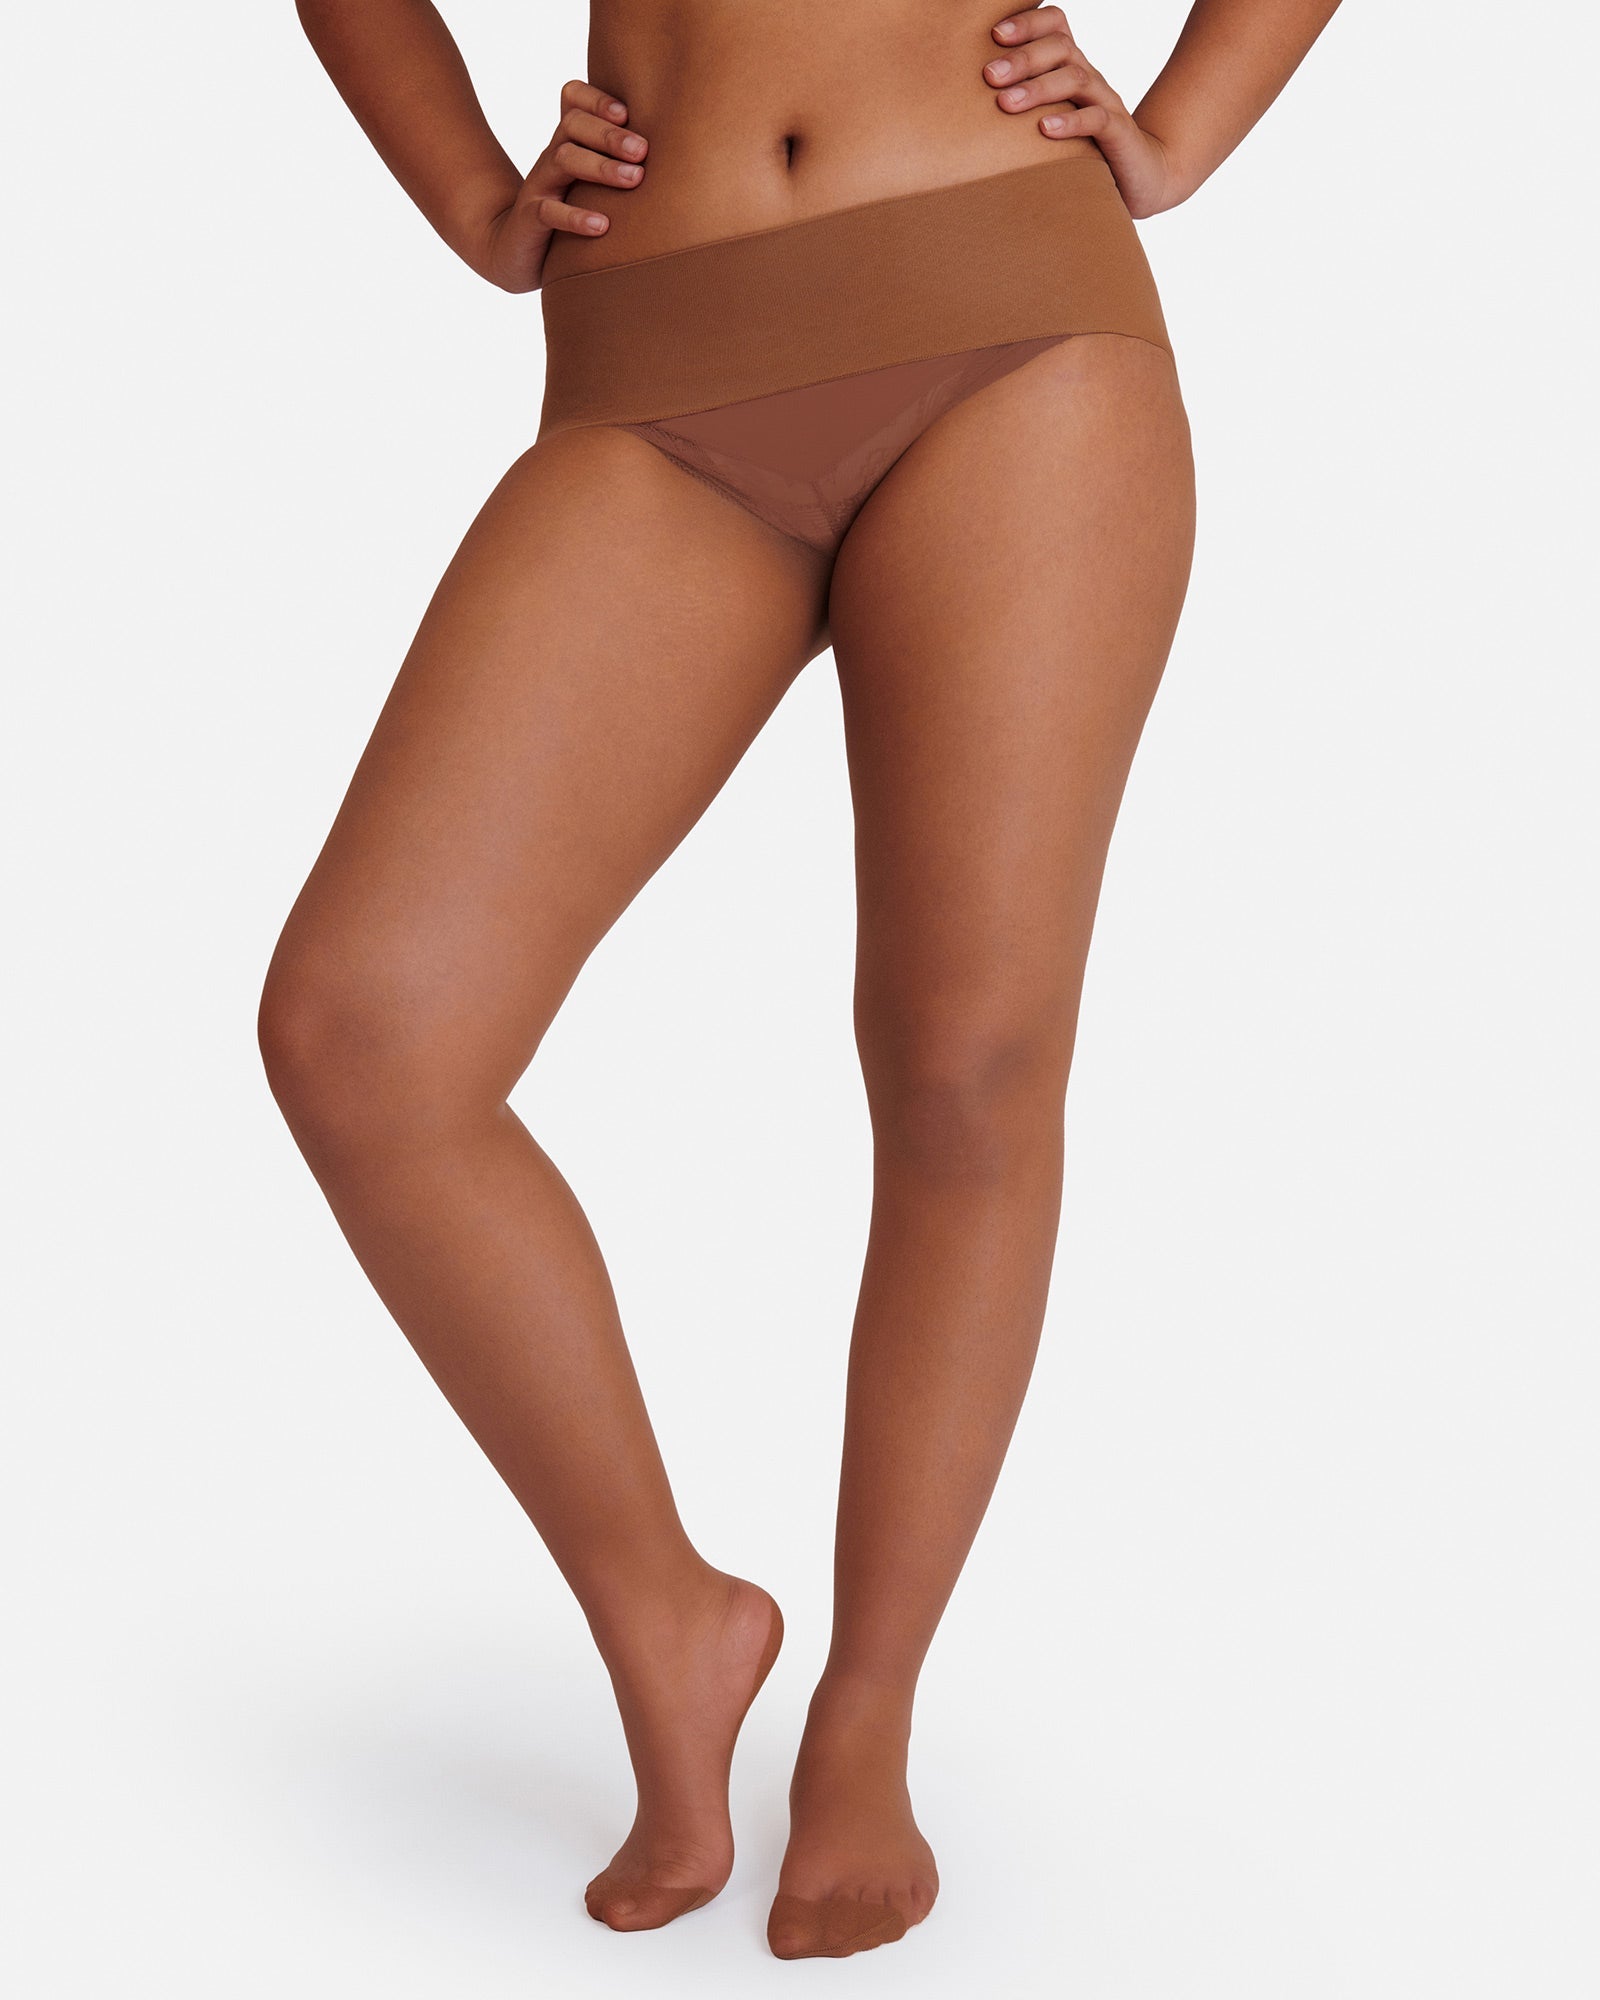 The Nude, Invincible Pearl, Sheer Nude Tights